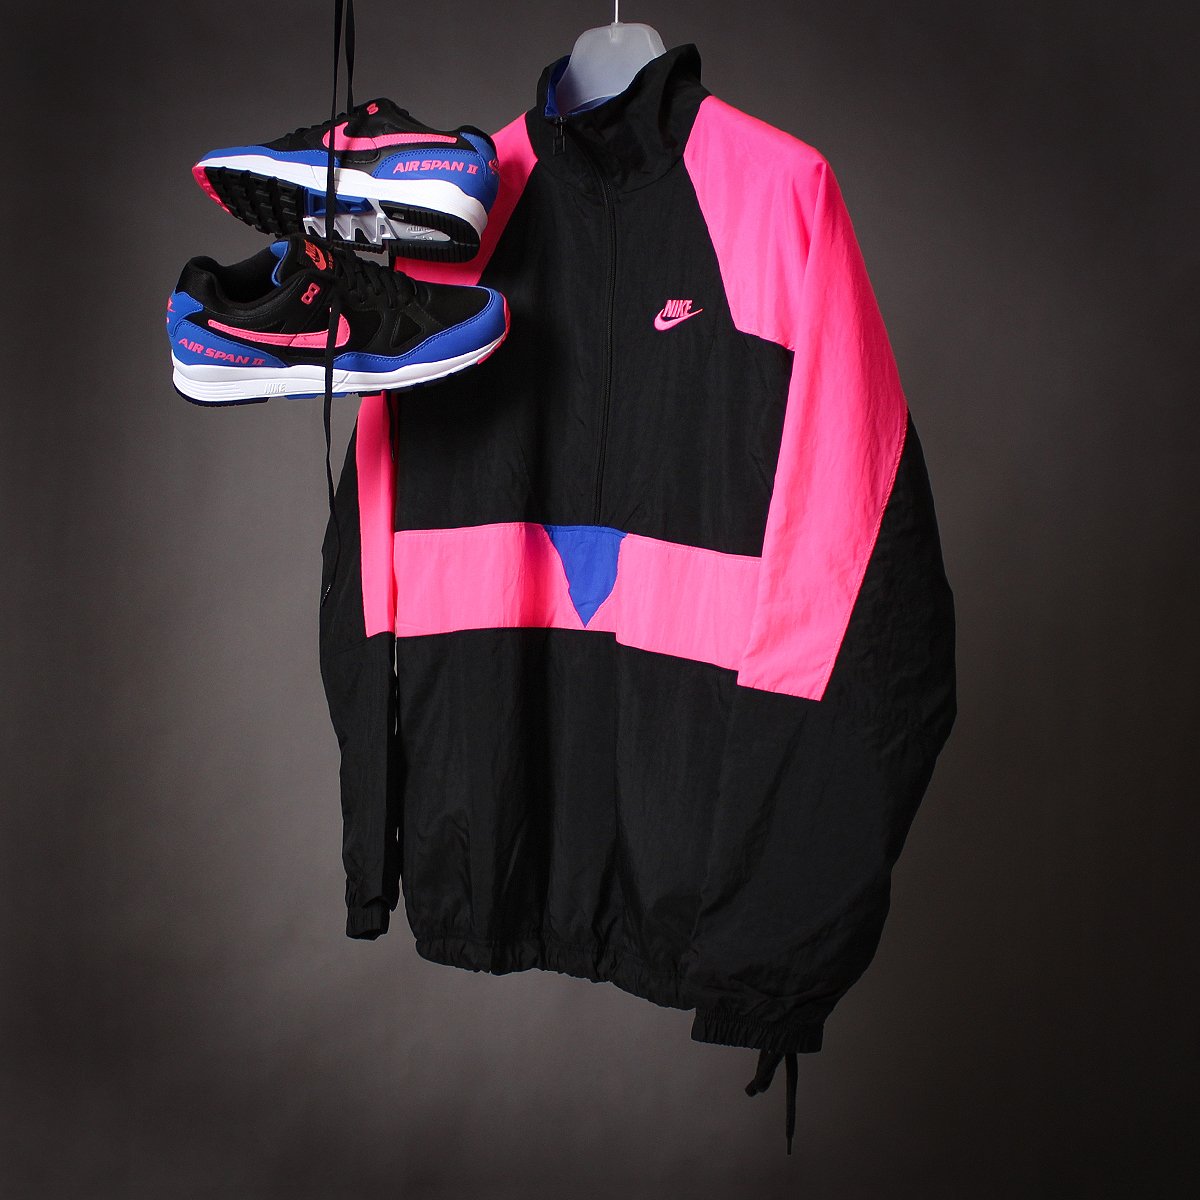 Conquistador falso apretón Urban Industry on Twitter: "Nike Apparel drop continues, check out the new  Nike Sportswear Vaporwave Woven Jackets with matching track pants on the  site now... https://t.co/BgwOcwnPEV https://t.co/sMfo84mPuC" / Twitter